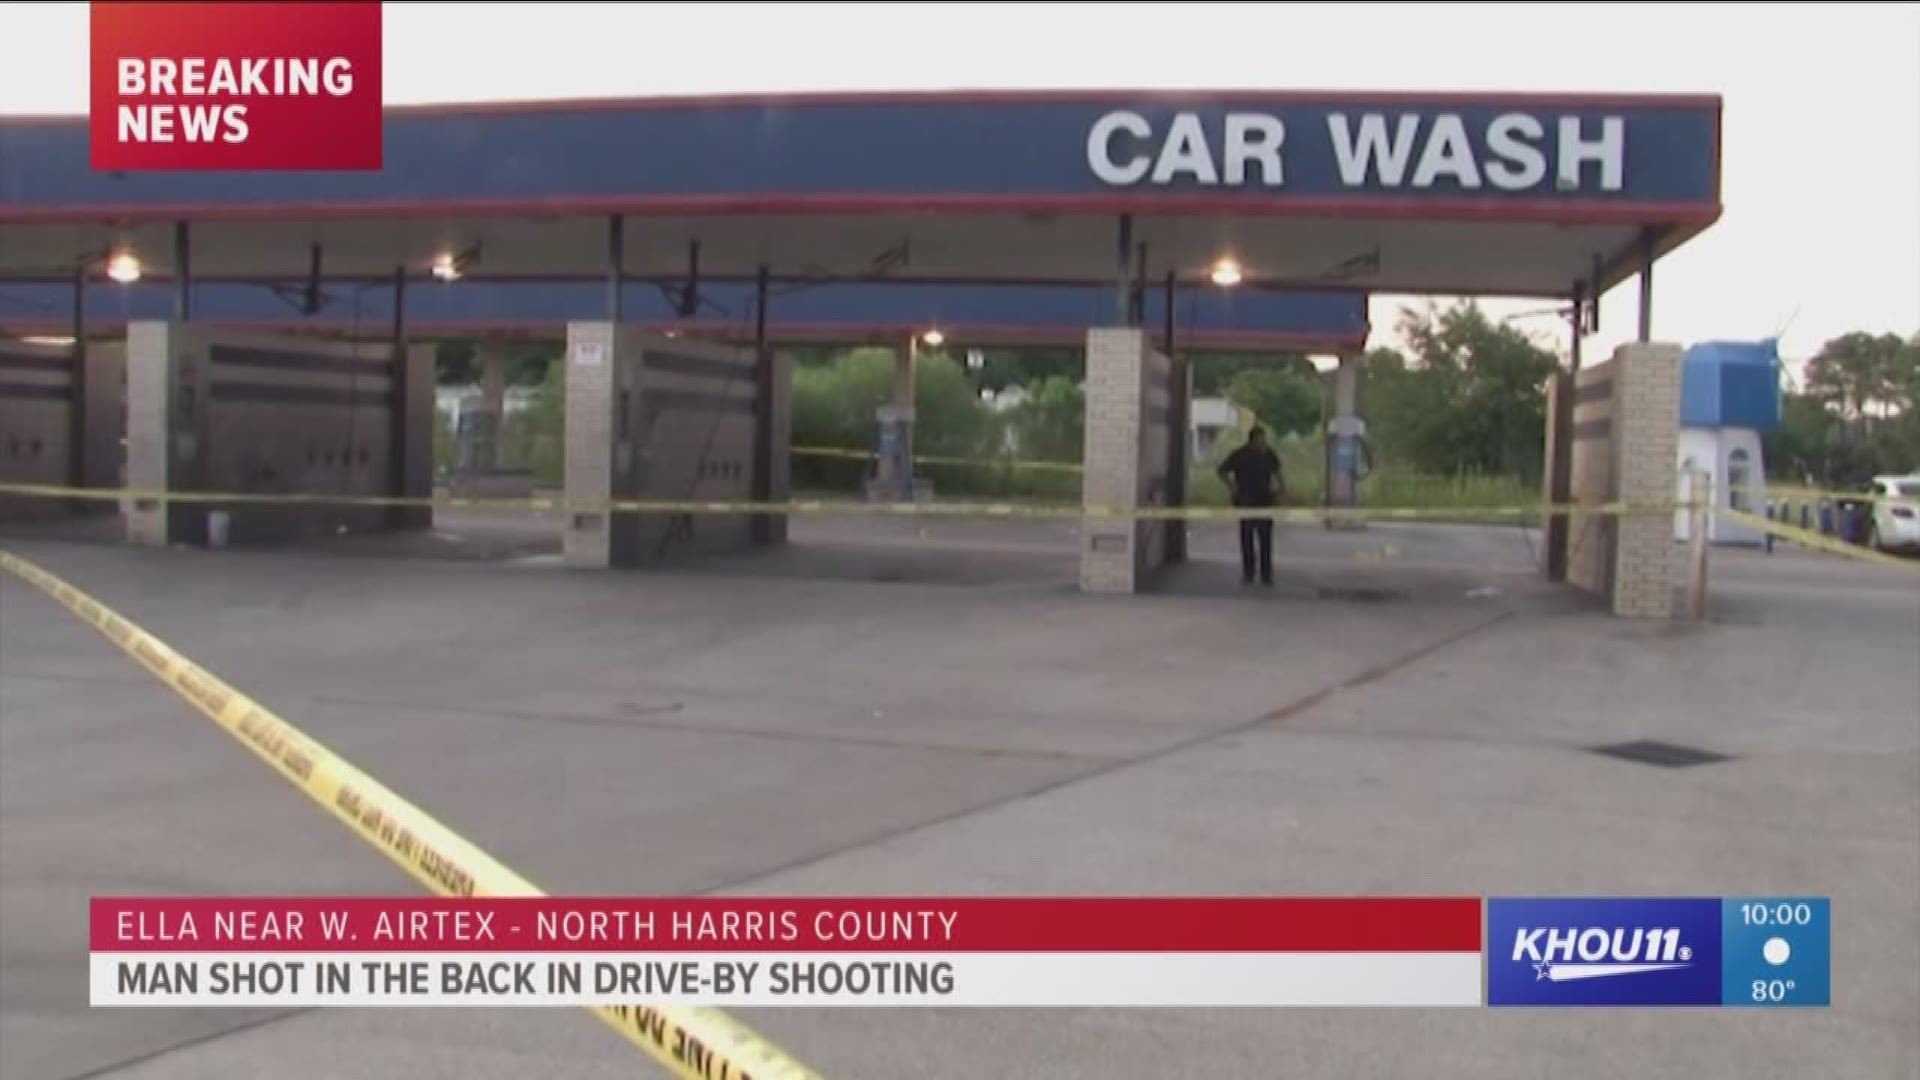 A man was wounded Tuesday evening in a drive-by shooting in north Harris County.